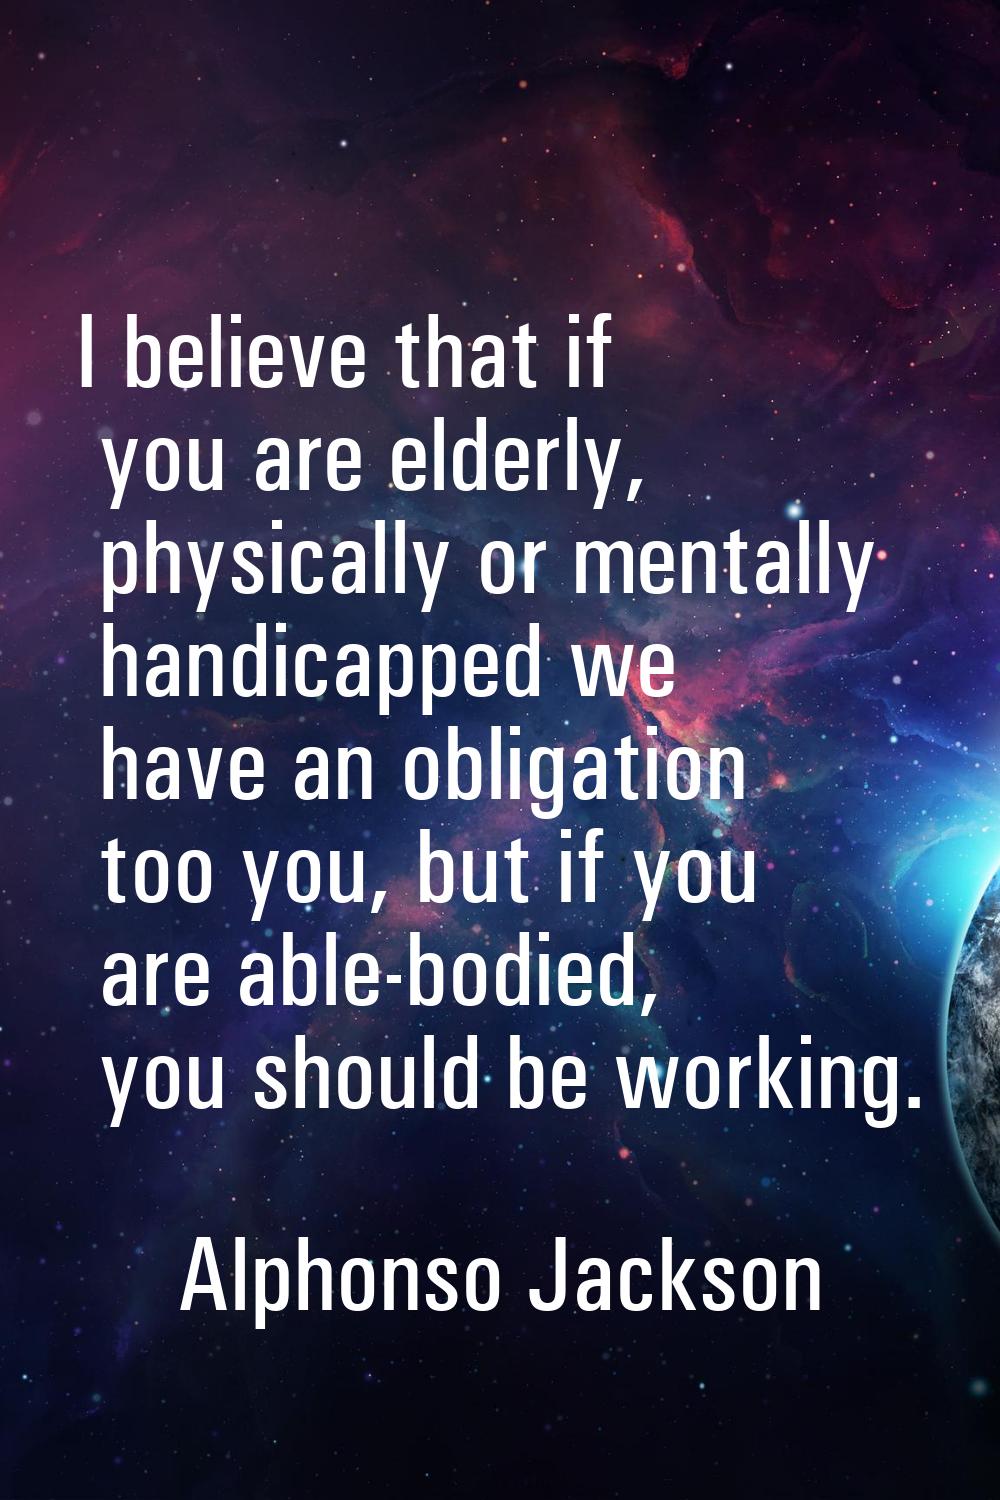 I believe that if you are elderly, physically or mentally handicapped we have an obligation too you